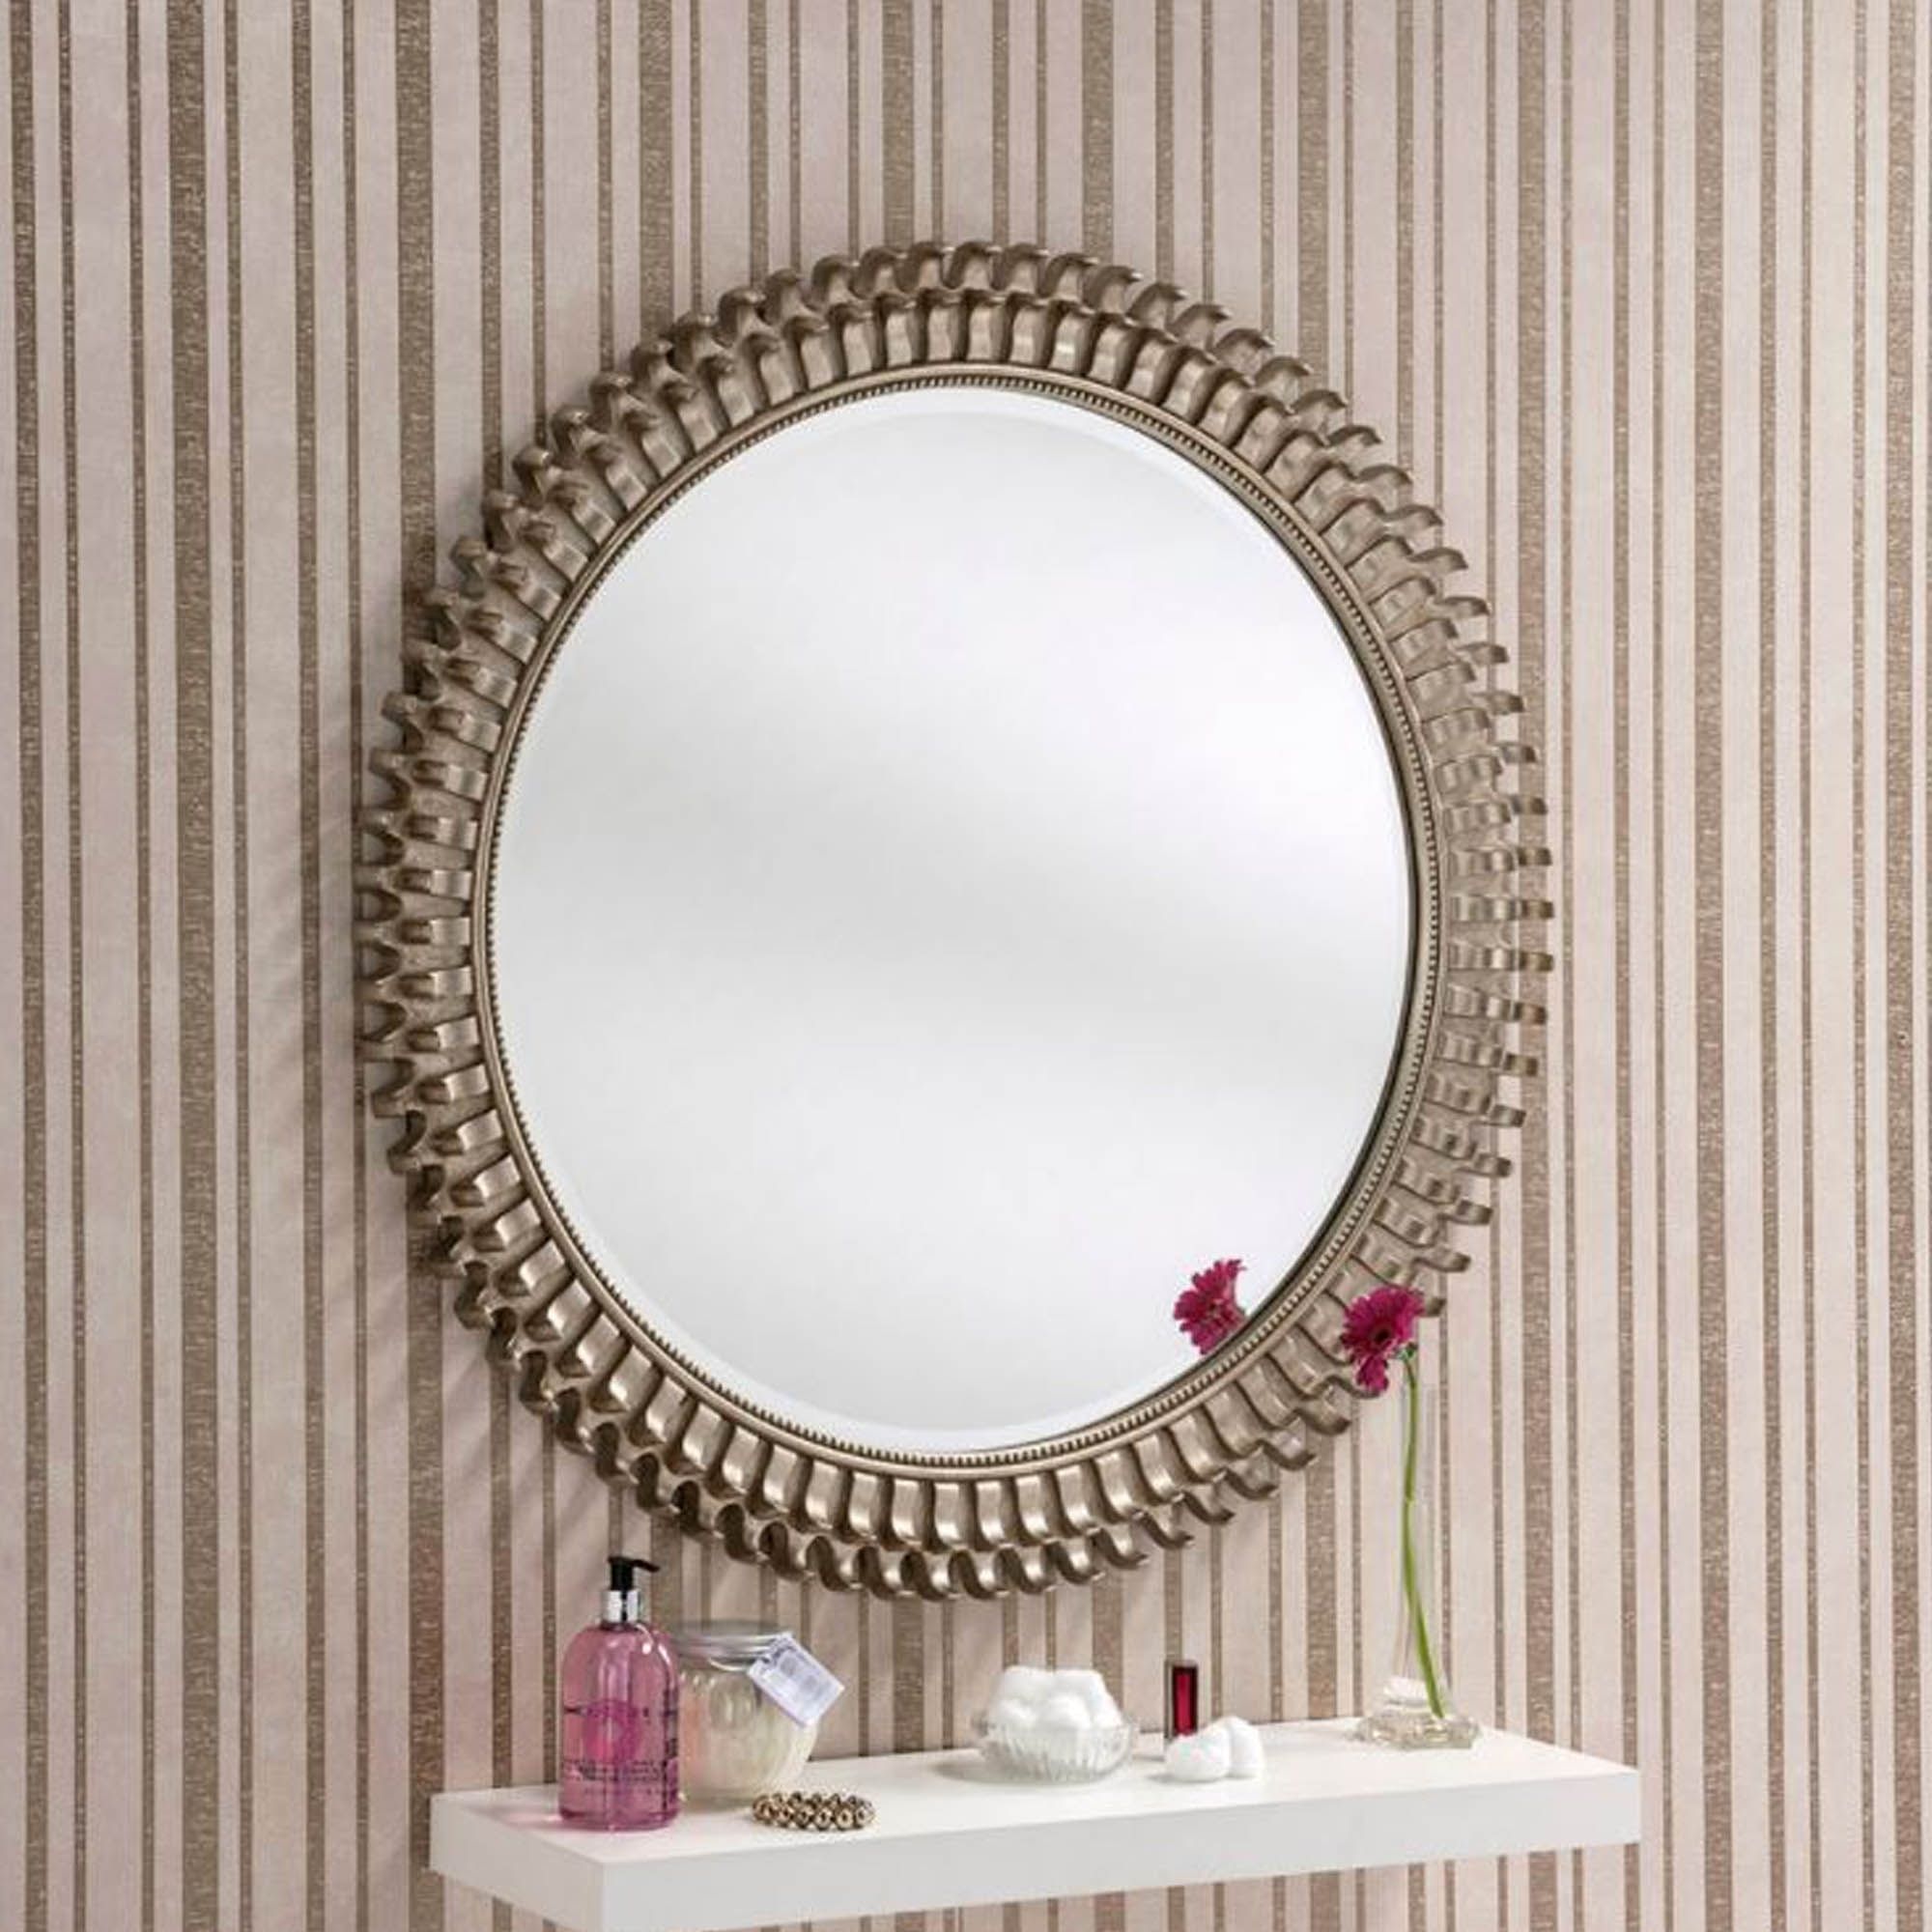 Round Contemporary Antique Silver Wall Mirror | Homesdirect365 Regarding Antiqued Silver Quatrefoil Wall Mirrors (View 6 of 15)